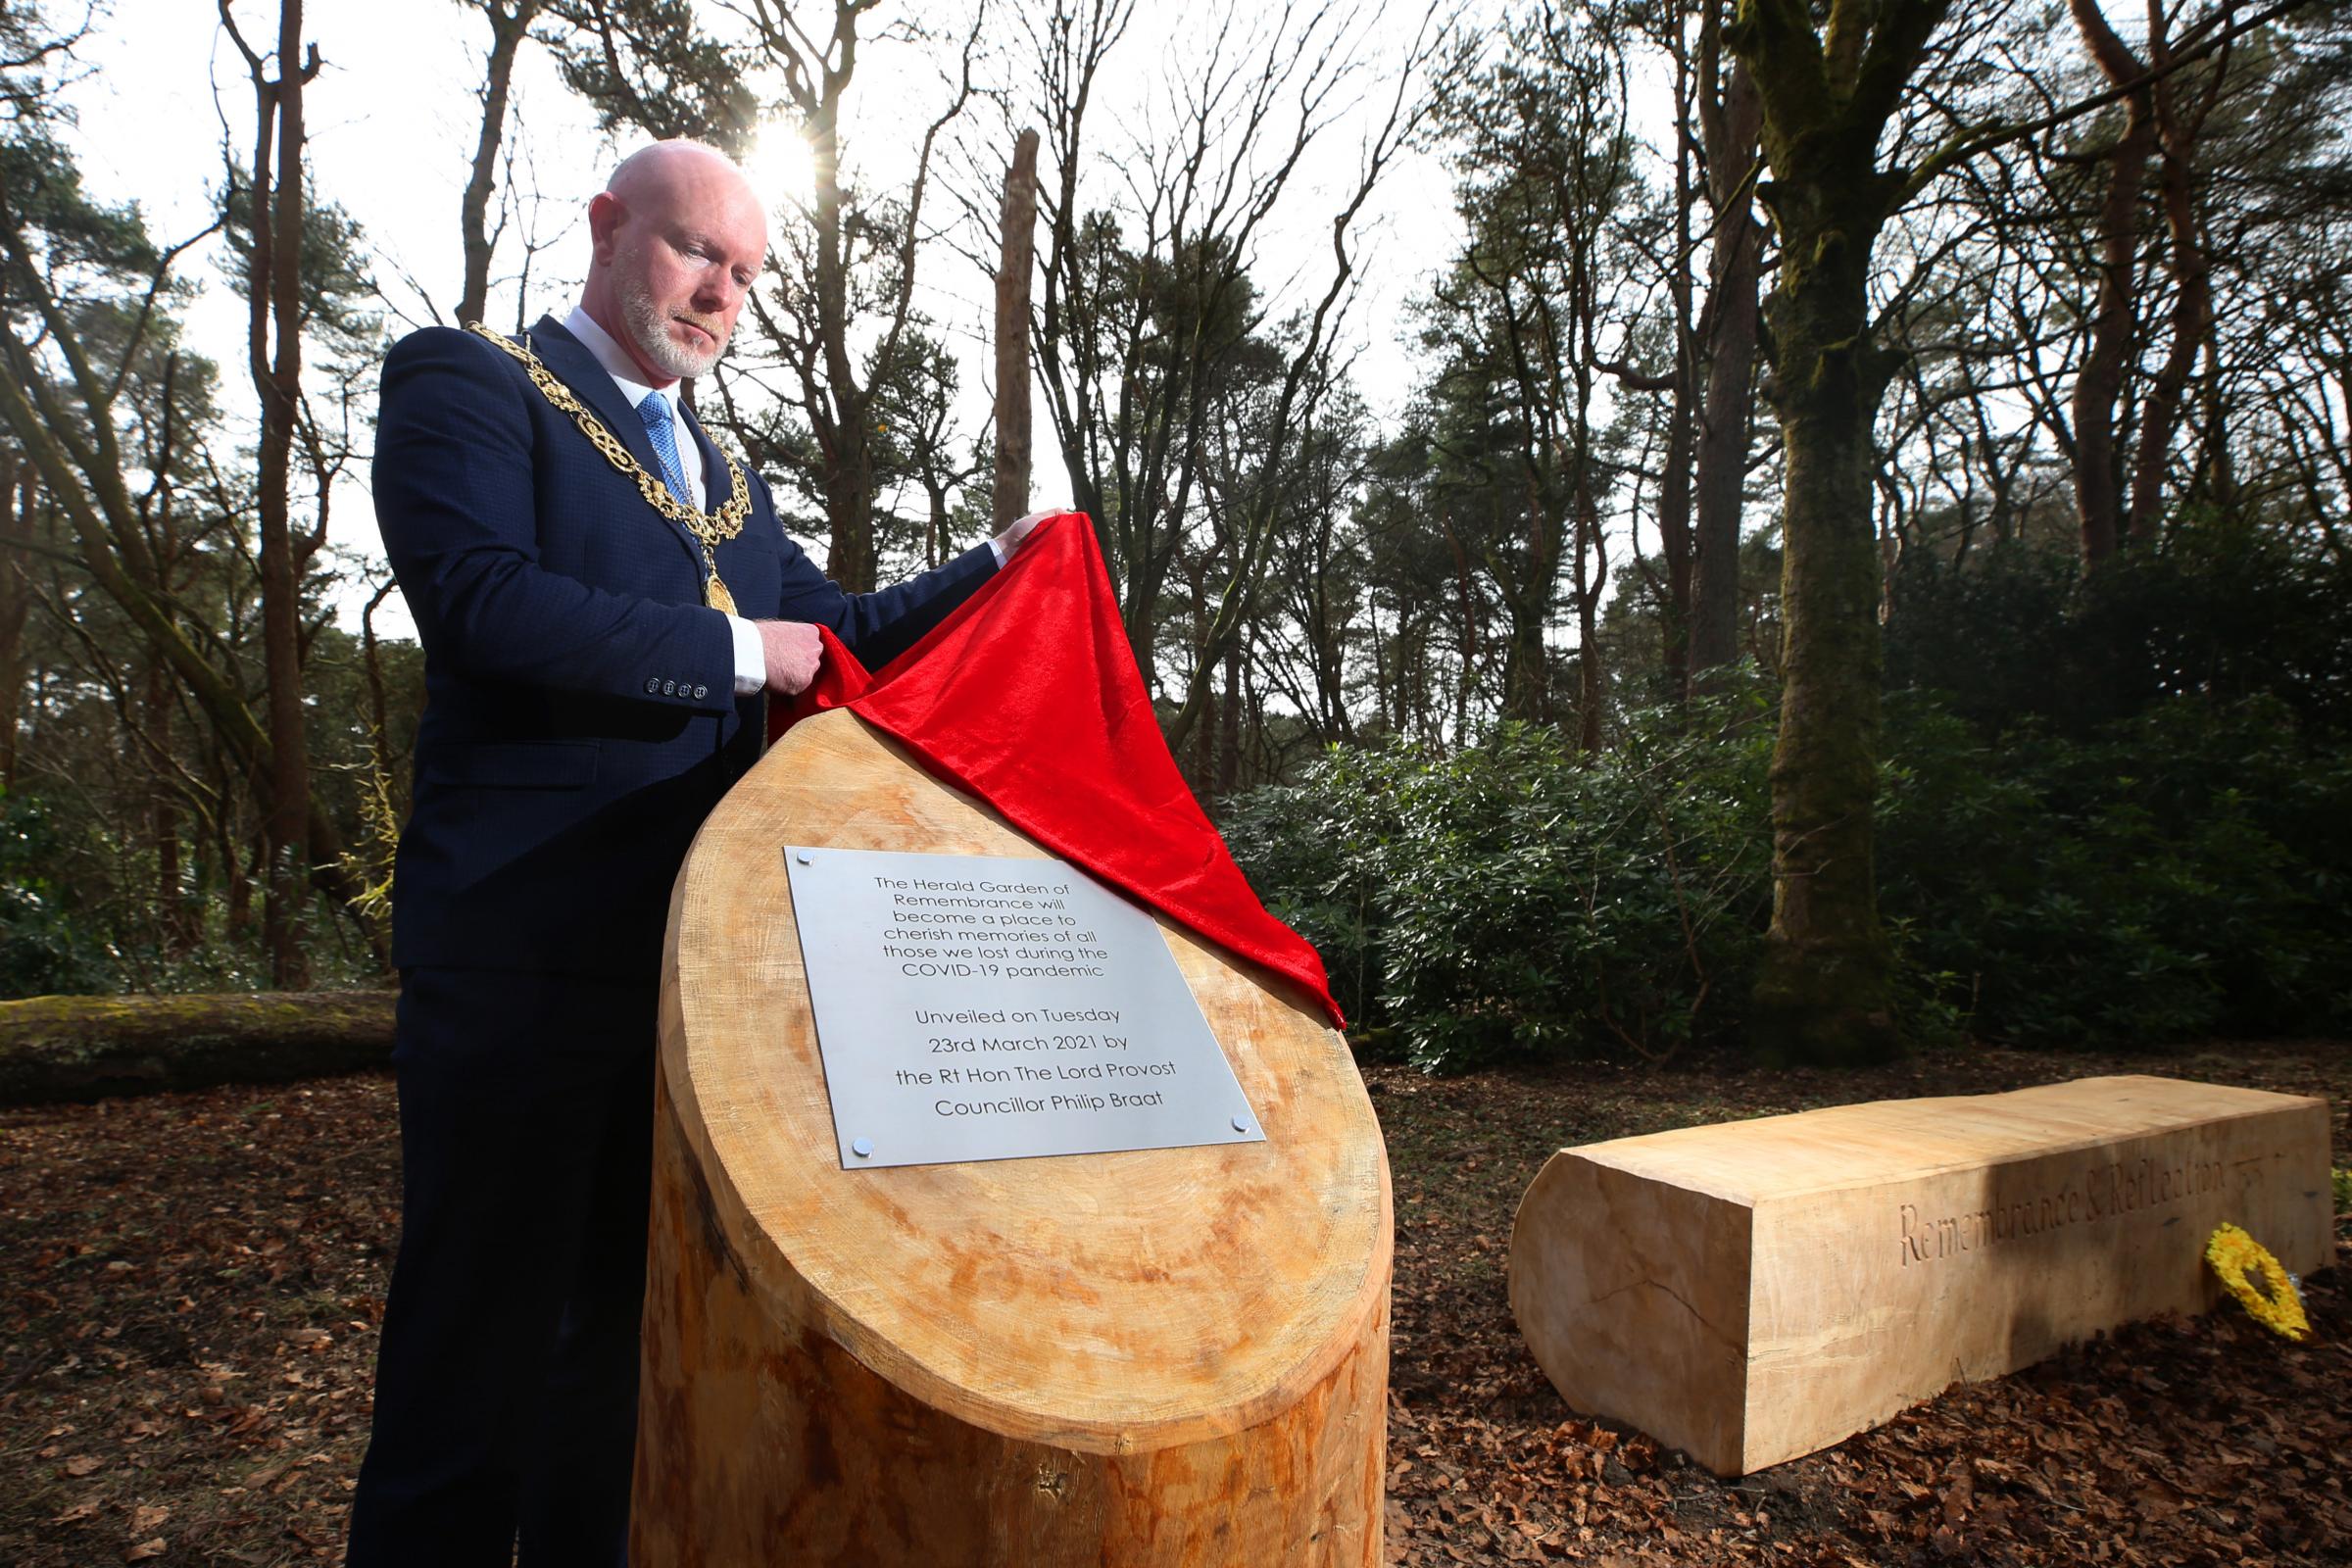 The plaque is unveiled by Lord Provost of Glasgow Philip Braat to mark the site reveal for the memorial garden